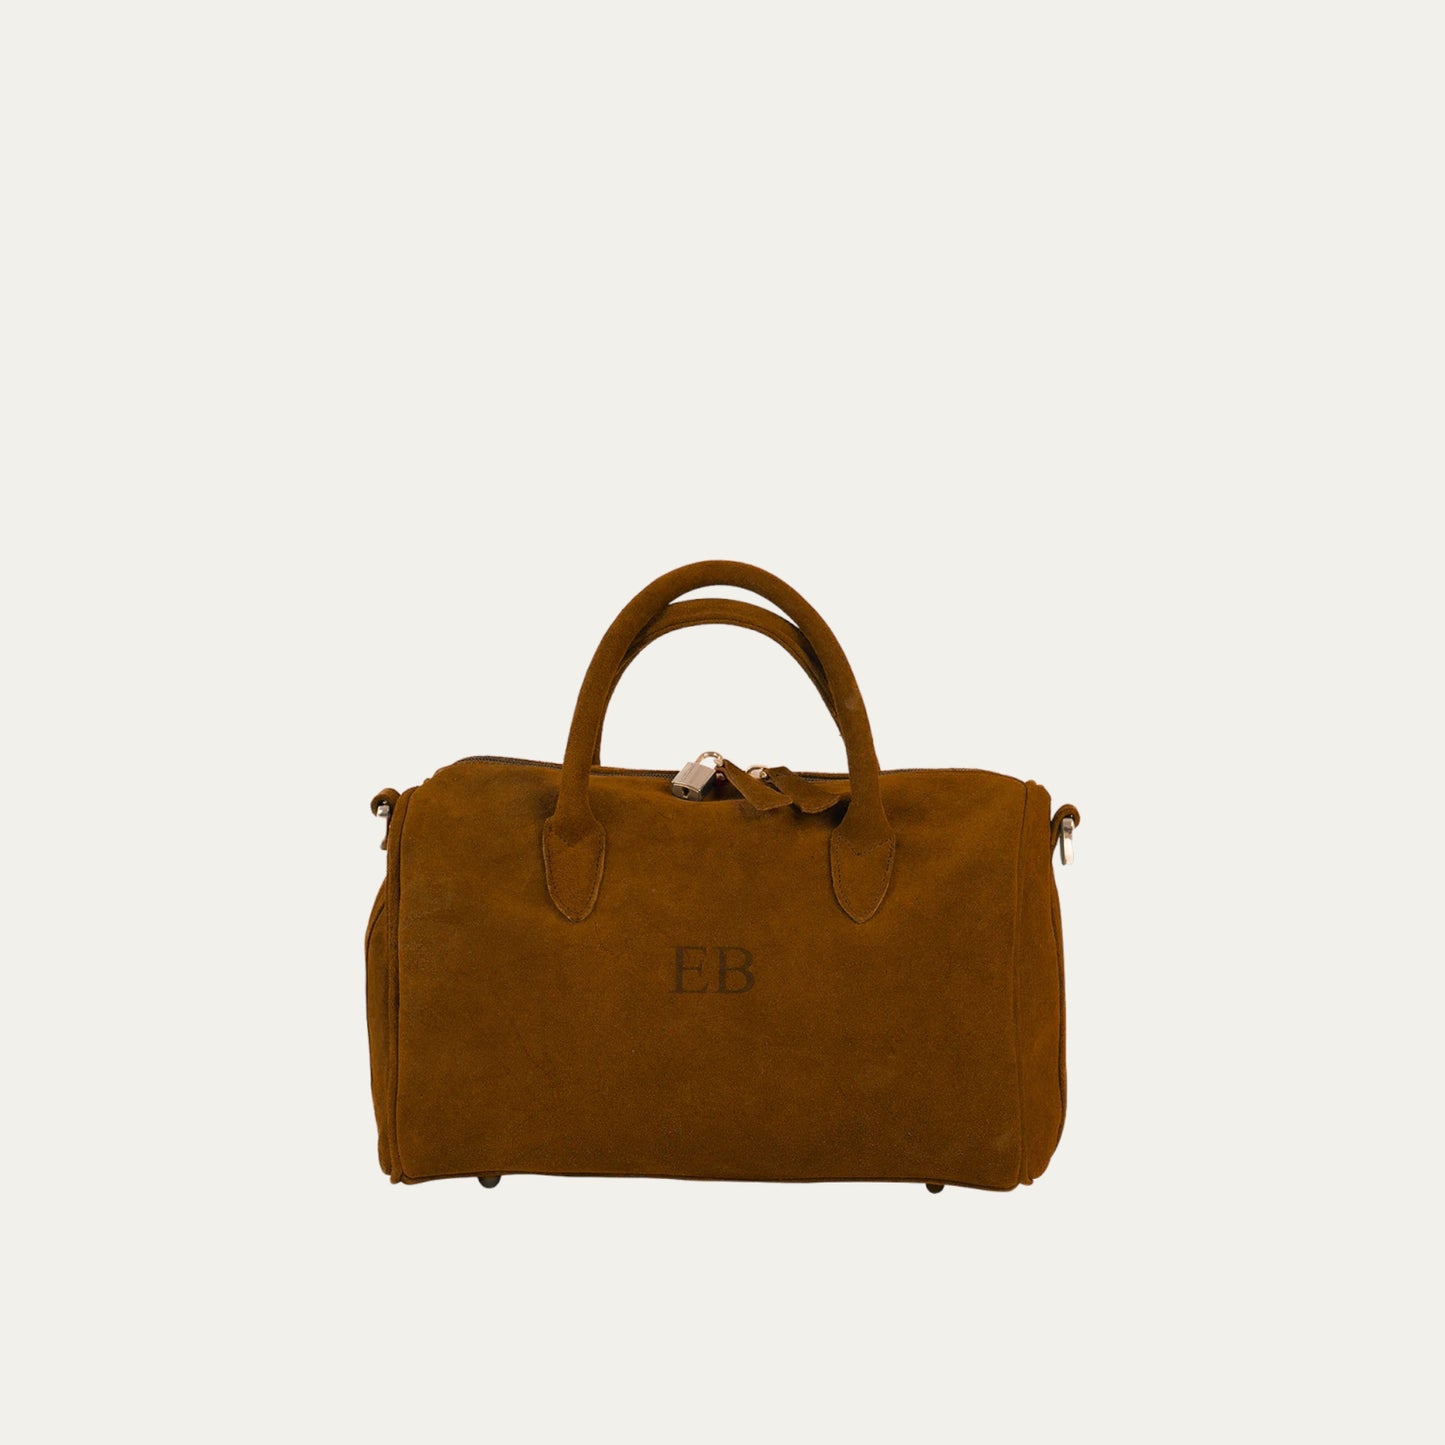 DAYBYDAY CATANIA '30 - Suede Crust Leather Top Handle Bag